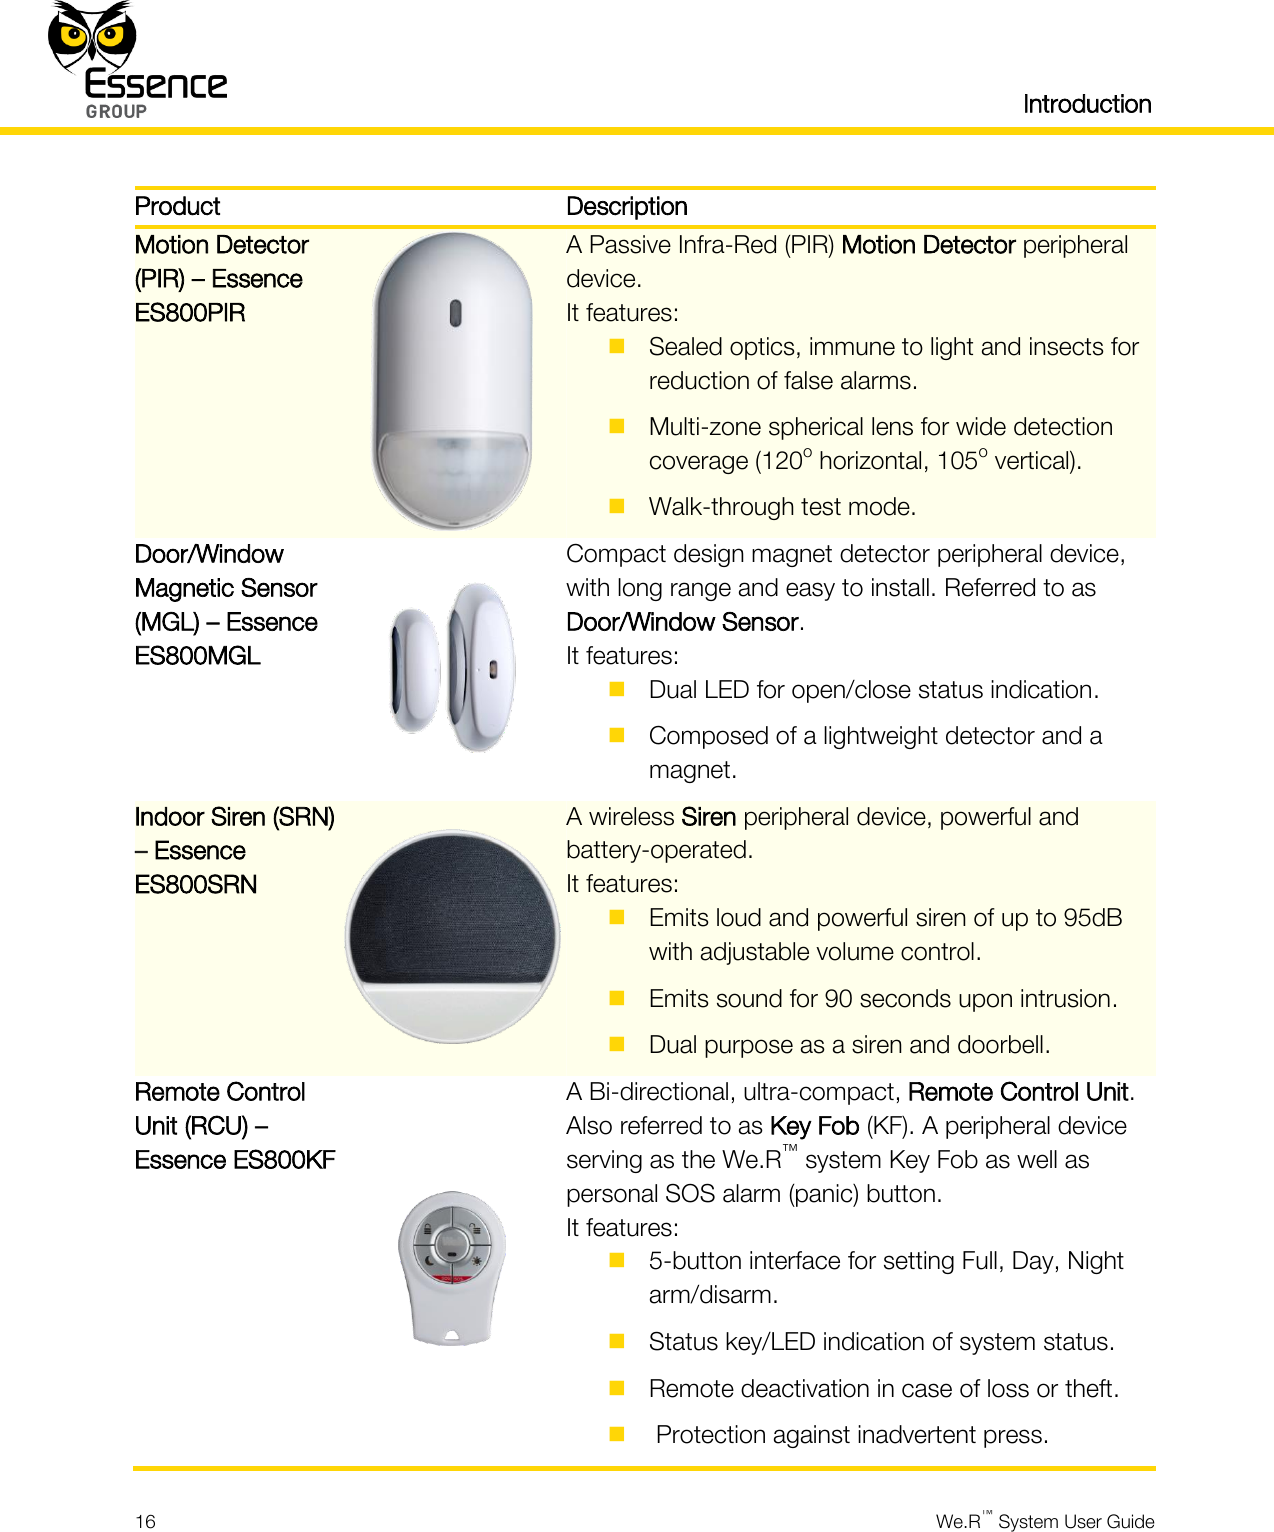   Introduction  16  We.R™ System User Guide  Product  Description Motion Detector (PIR) – Essence ES800PIR  A Passive Infra-Red (PIR) Motion Detector peripheral device. It features:  Sealed optics, immune to light and insects for reduction of false alarms.  Multi-zone spherical lens for wide detection coverage (120o horizontal, 105o vertical).  Walk-through test mode. Door/Window Magnetic Sensor (MGL) – Essence ES800MGL  Compact design magnet detector peripheral device, with long range and easy to install. Referred to as Door/Window Sensor. It features:  Dual LED for open/close status indication.  Composed of a lightweight detector and a magnet. Indoor Siren (SRN) – Essence ES800SRN  A wireless Siren peripheral device, powerful and battery-operated. It features:  Emits loud and powerful siren of up to 95dB with adjustable volume control.  Emits sound for 90 seconds upon intrusion.  Dual purpose as a siren and doorbell. Remote Control Unit (RCU) – Essence ES800KF  A Bi-directional, ultra-compact, Remote Control Unit. Also referred to as Key Fob (KF). A peripheral device serving as the We.R™ system Key Fob as well as personal SOS alarm (panic) button. It features:  5-button interface for setting Full, Day, Night arm/disarm.  Status key/LED indication of system status.  Remote deactivation in case of loss or theft.   Protection against inadvertent press. 